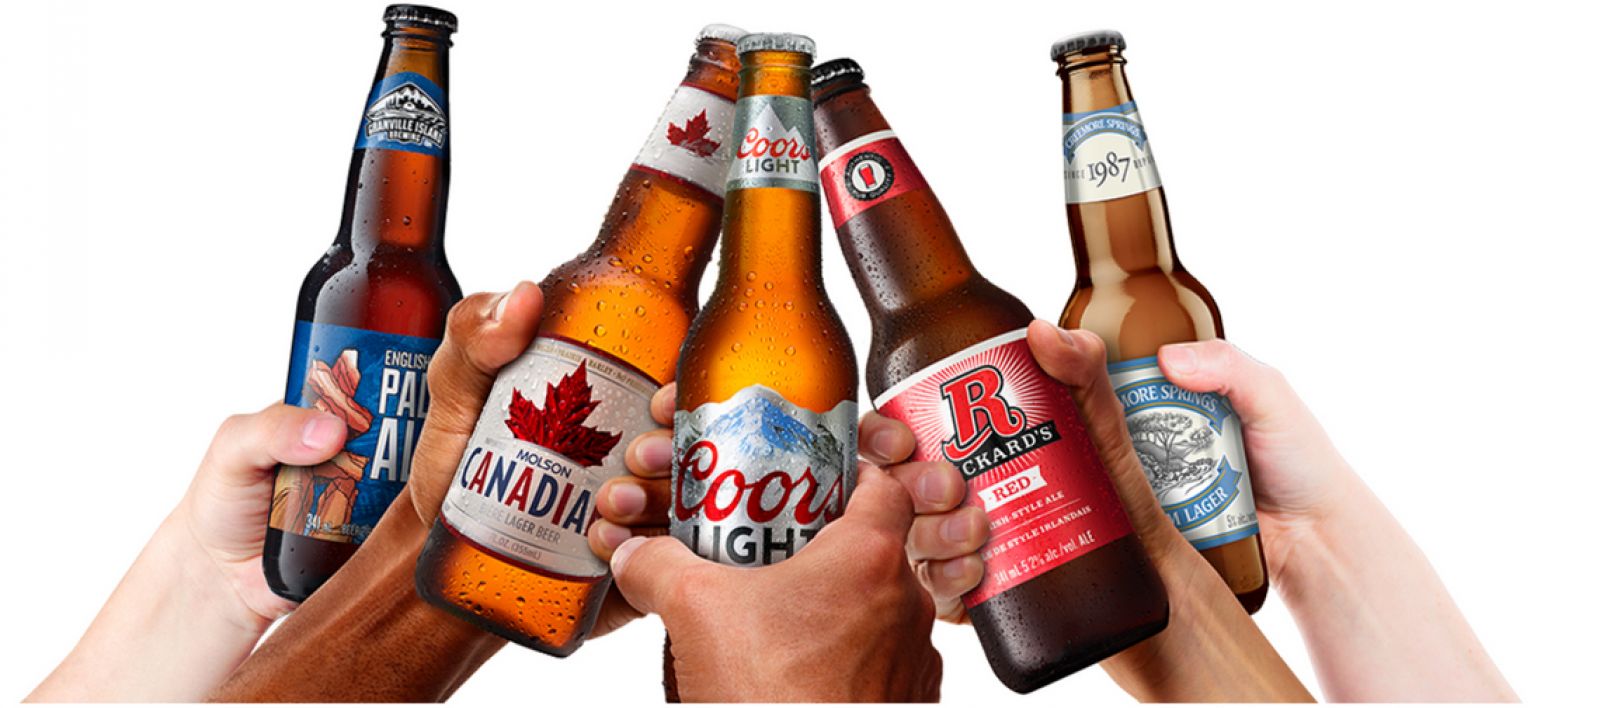 Photo for: Molson Coors teams up with Hydropothecary on pot drinks